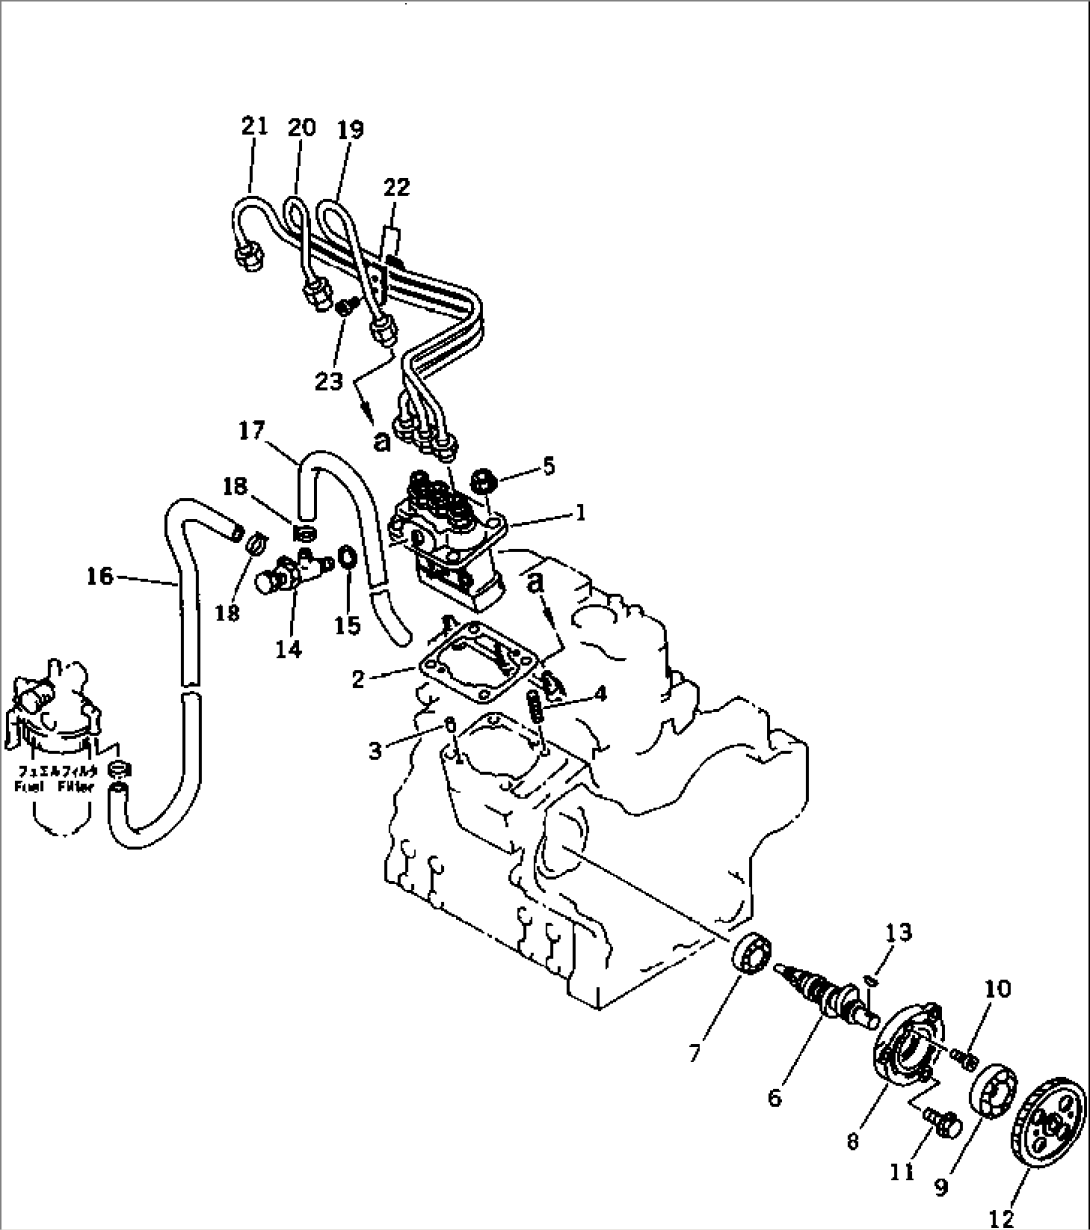 FUEL INJECTION PUMP AND PIPING(#03753-)